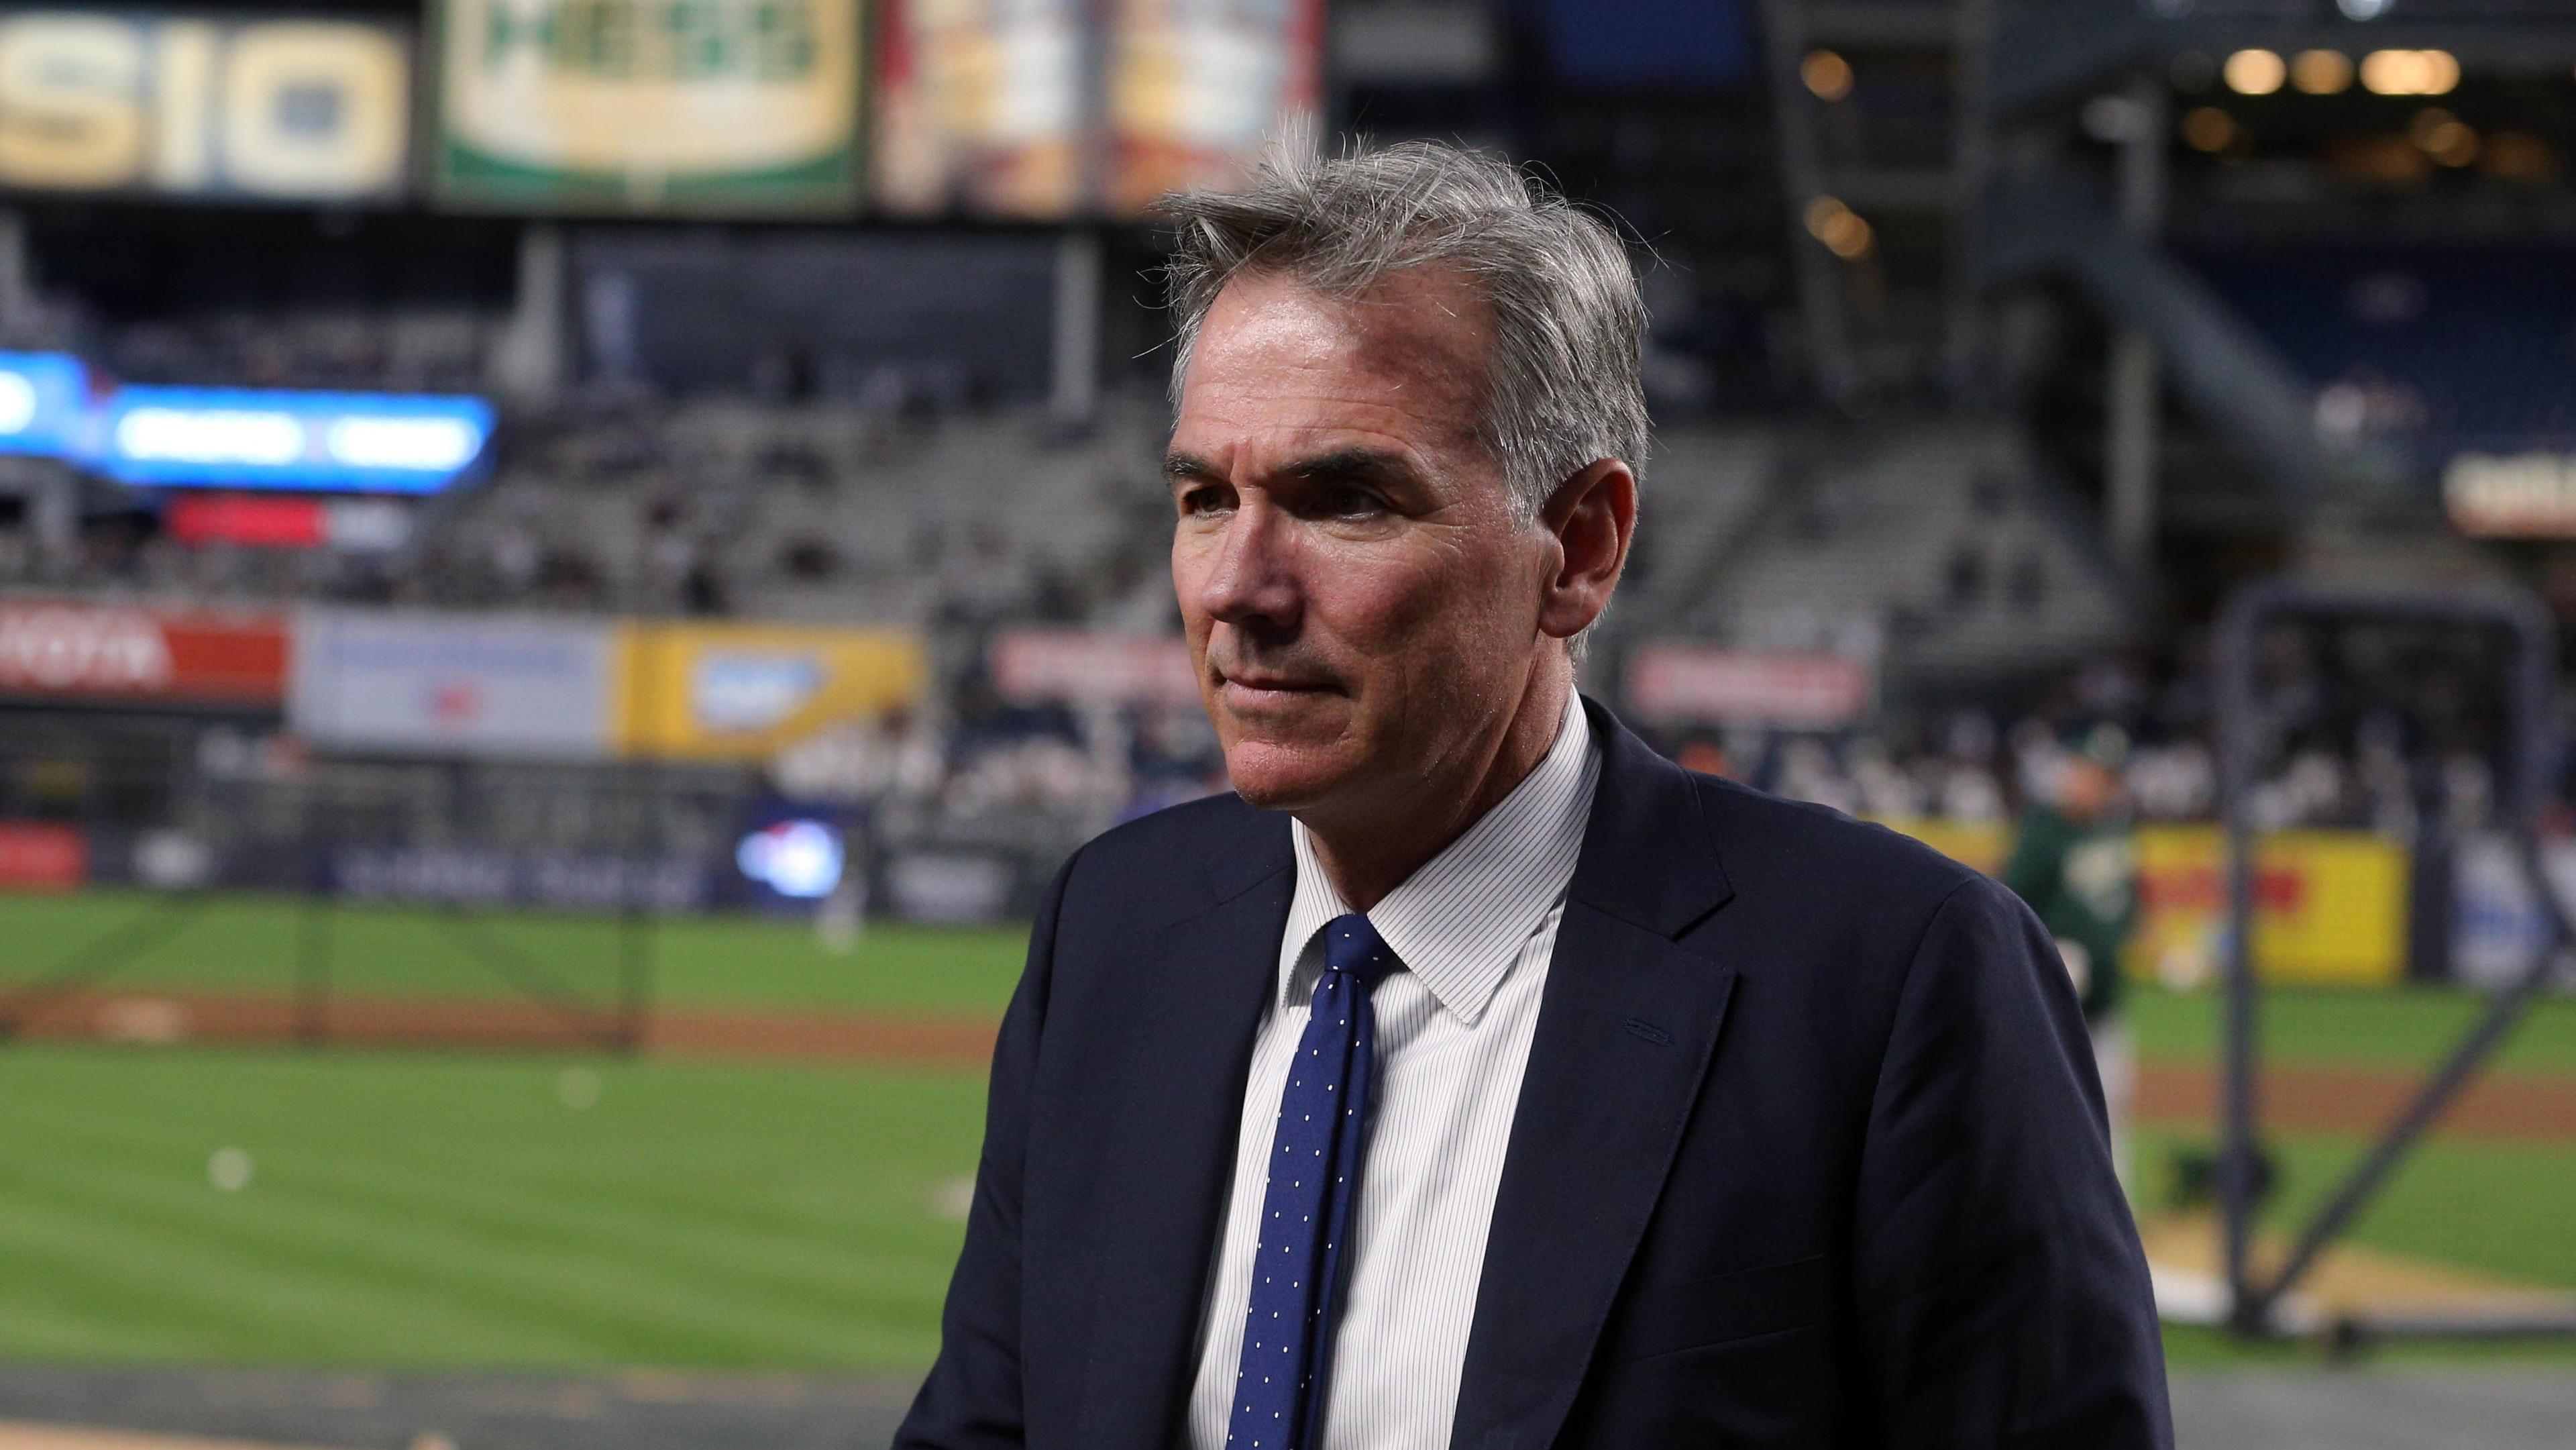 Oct 3, 2018; Bronx, NY, USA; Oakland Athletics vice president of baseball operations Billy Beane walks onto the field before the game against the New York Yankees in the 2018 American League wild card playoff baseball game at Yankee Stadium. Mandatory Credit: Brad Penner-USA TODAY Sports / Brad Penner-USA TODAY Sports